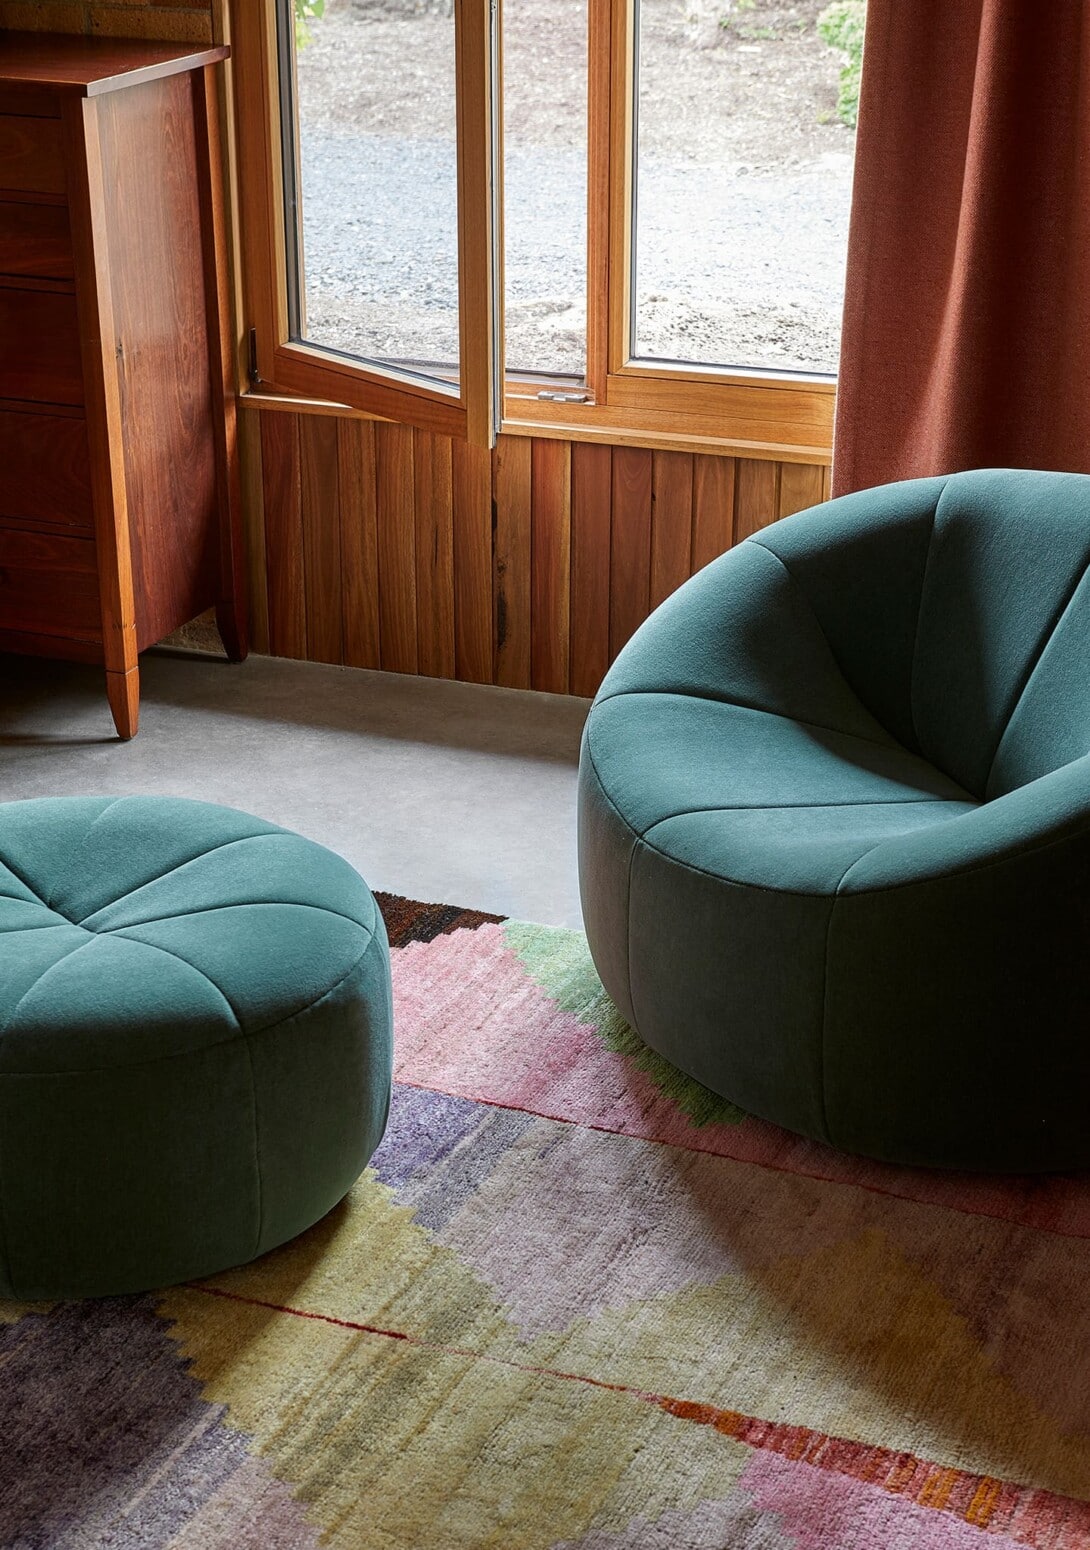 Pumpkin Armchair and Footstool teal green. Credit: Henry House by BEA+CO, The Local Project, Studio Martin, Derek Swalwell DOMO